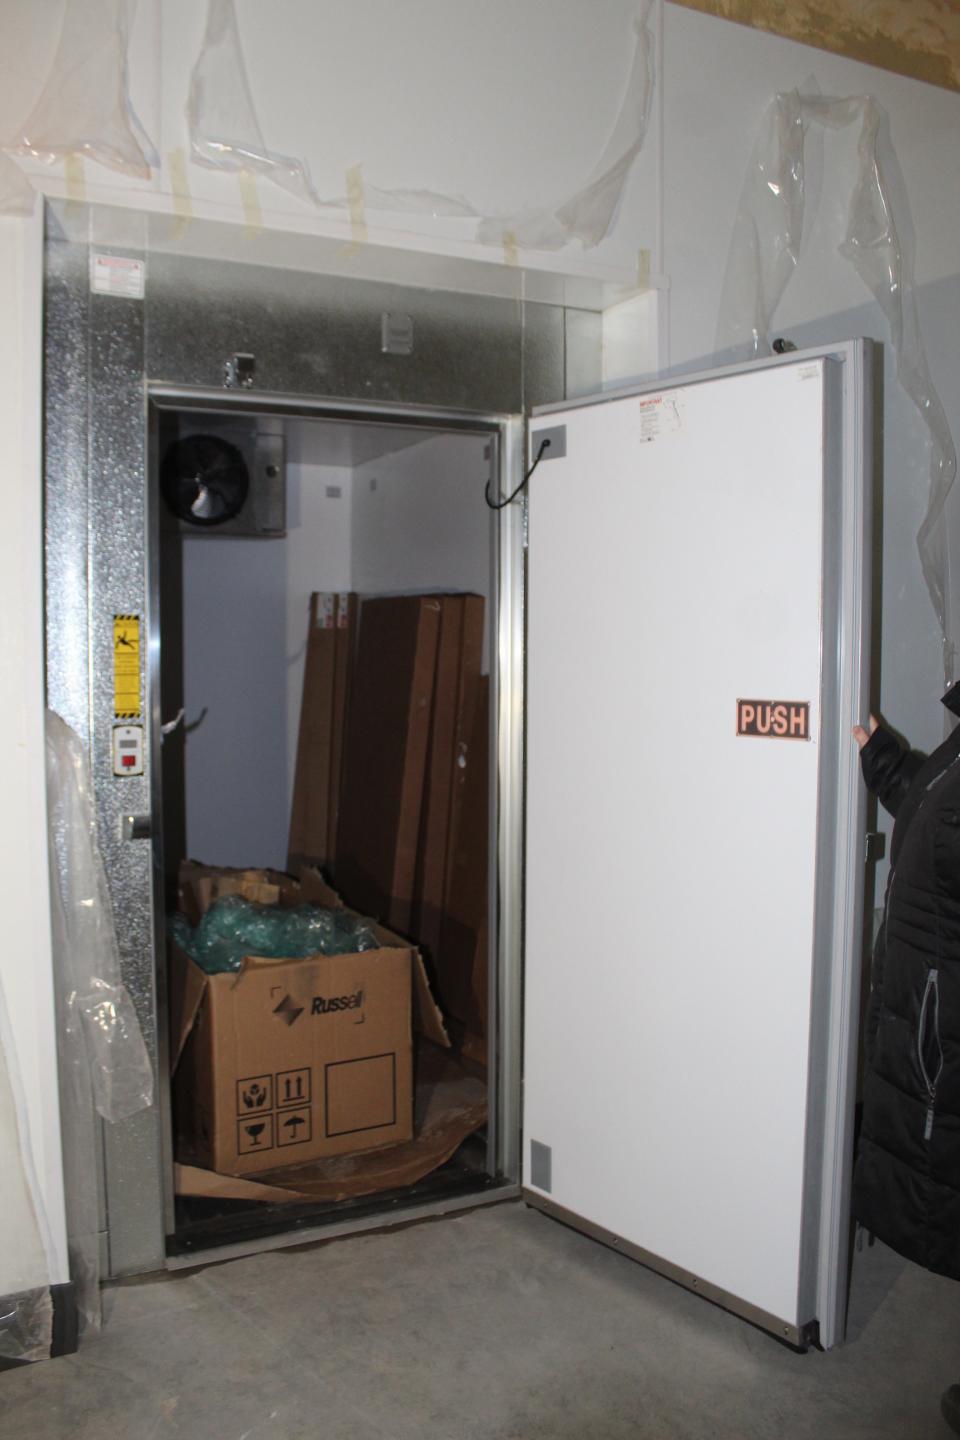 The new industrial size freezer to be used for The Lord's Kitchen has already been installed in the new building on Court Street that will house the Cheboygan Church of the Nazarene and Cheboygan Compassionate Ministries.